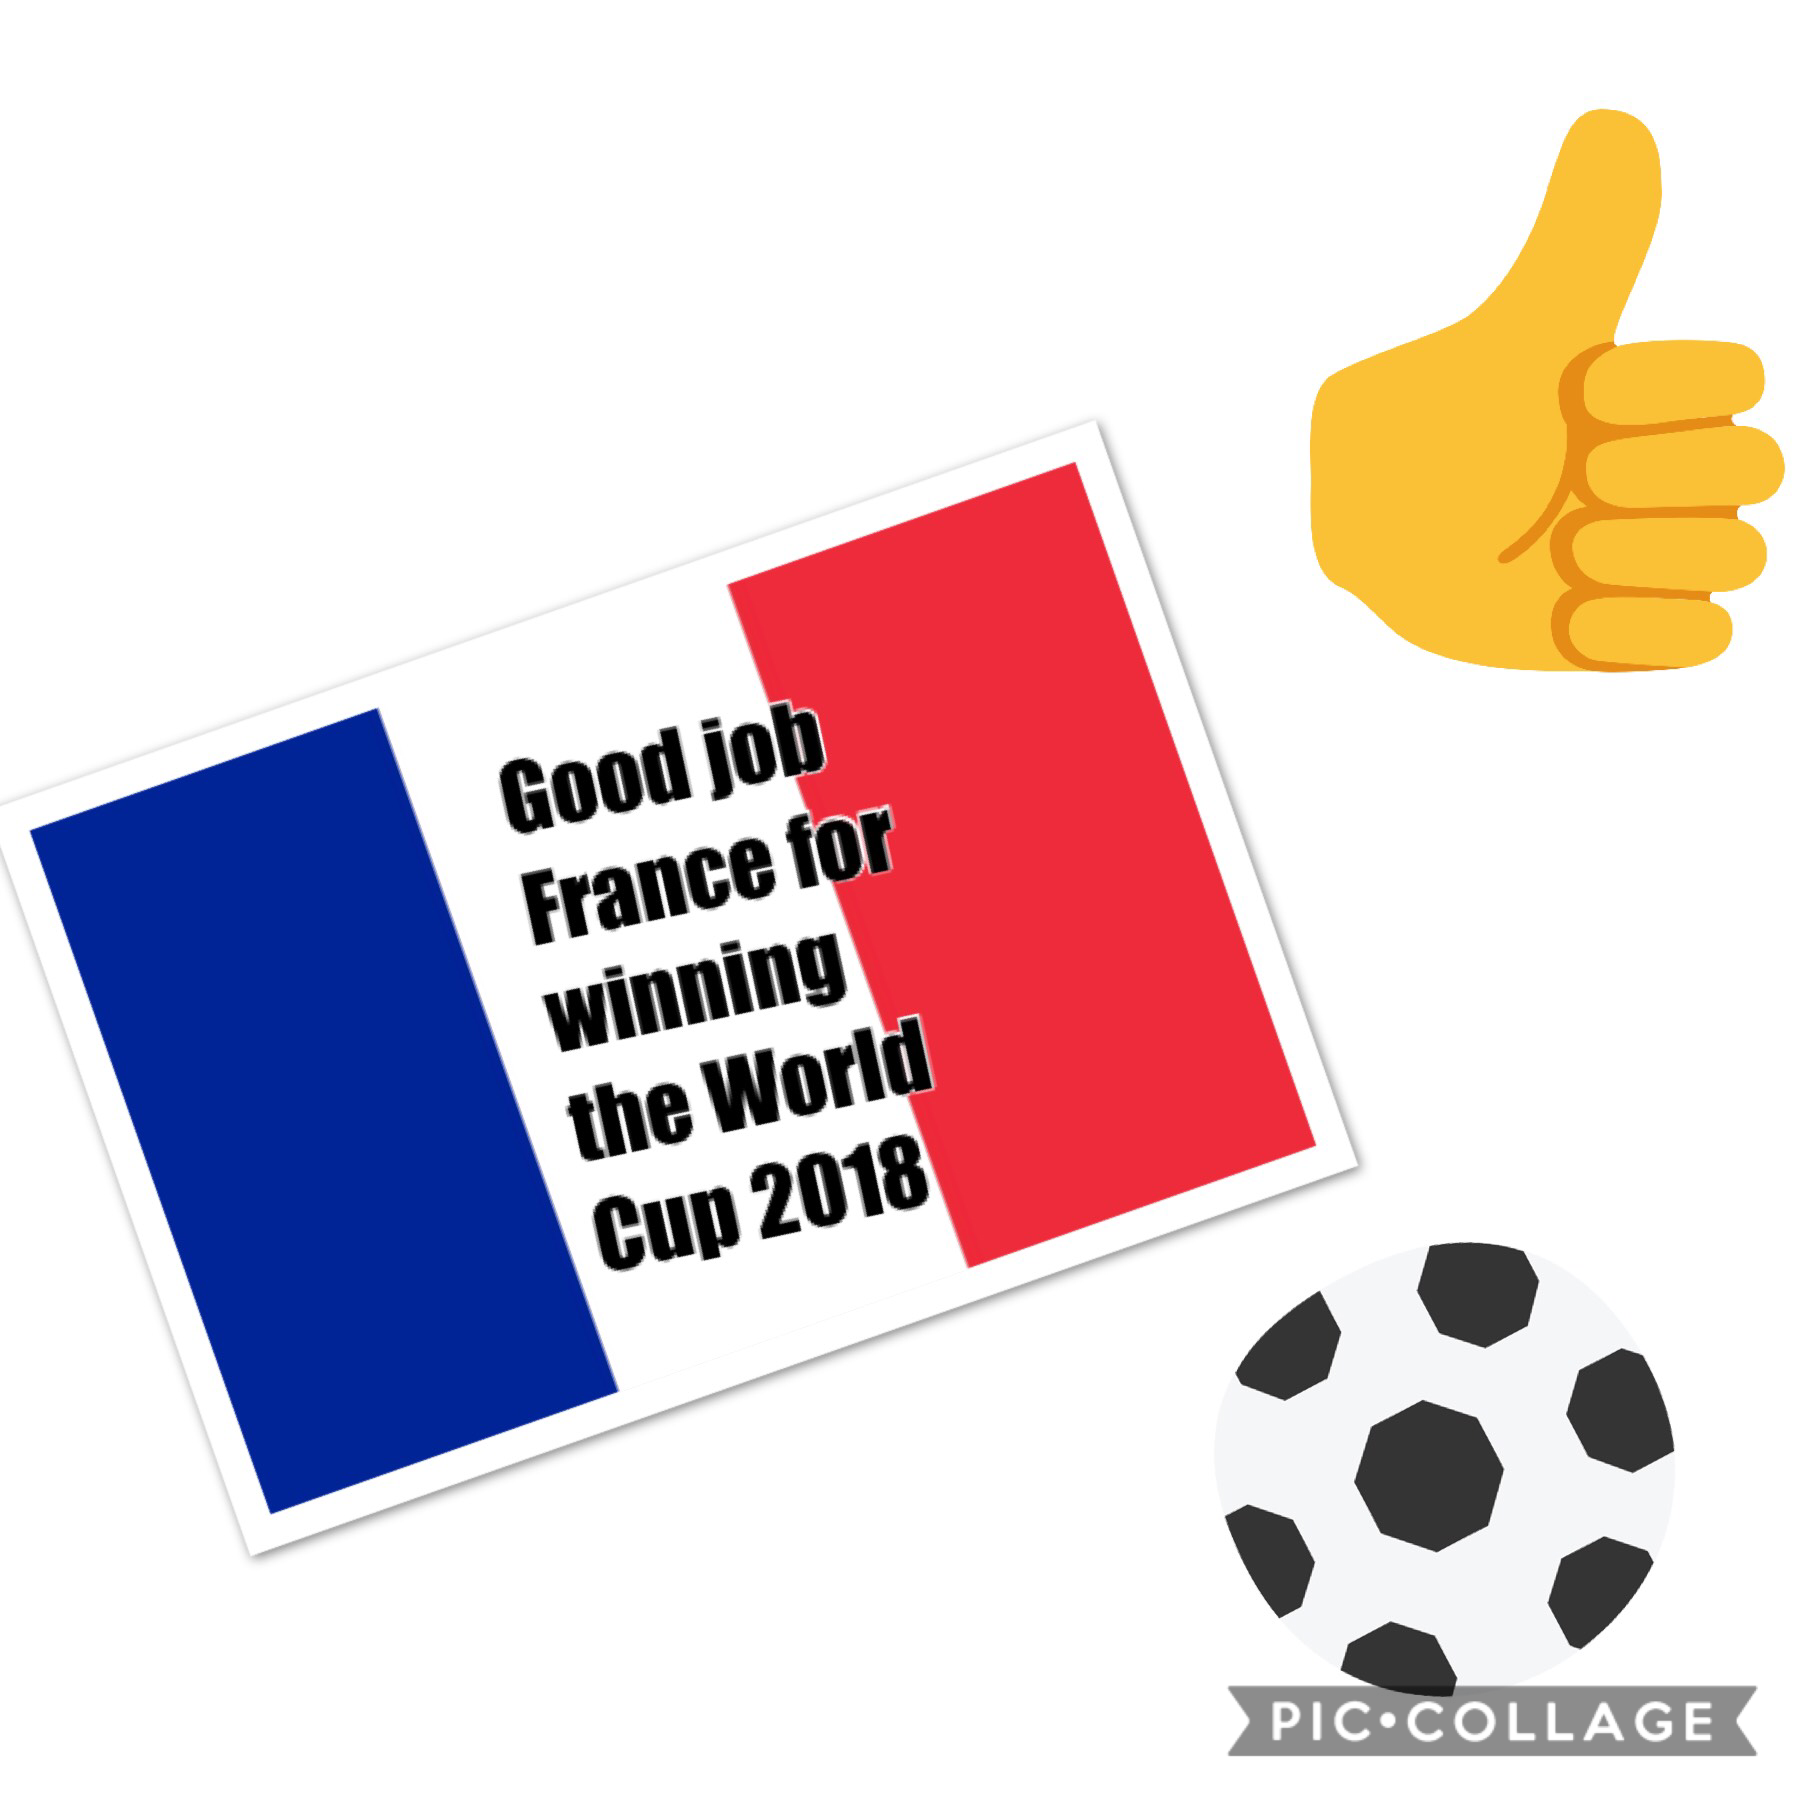 I wanted Portugal to win the World Cup but France did a really good job!